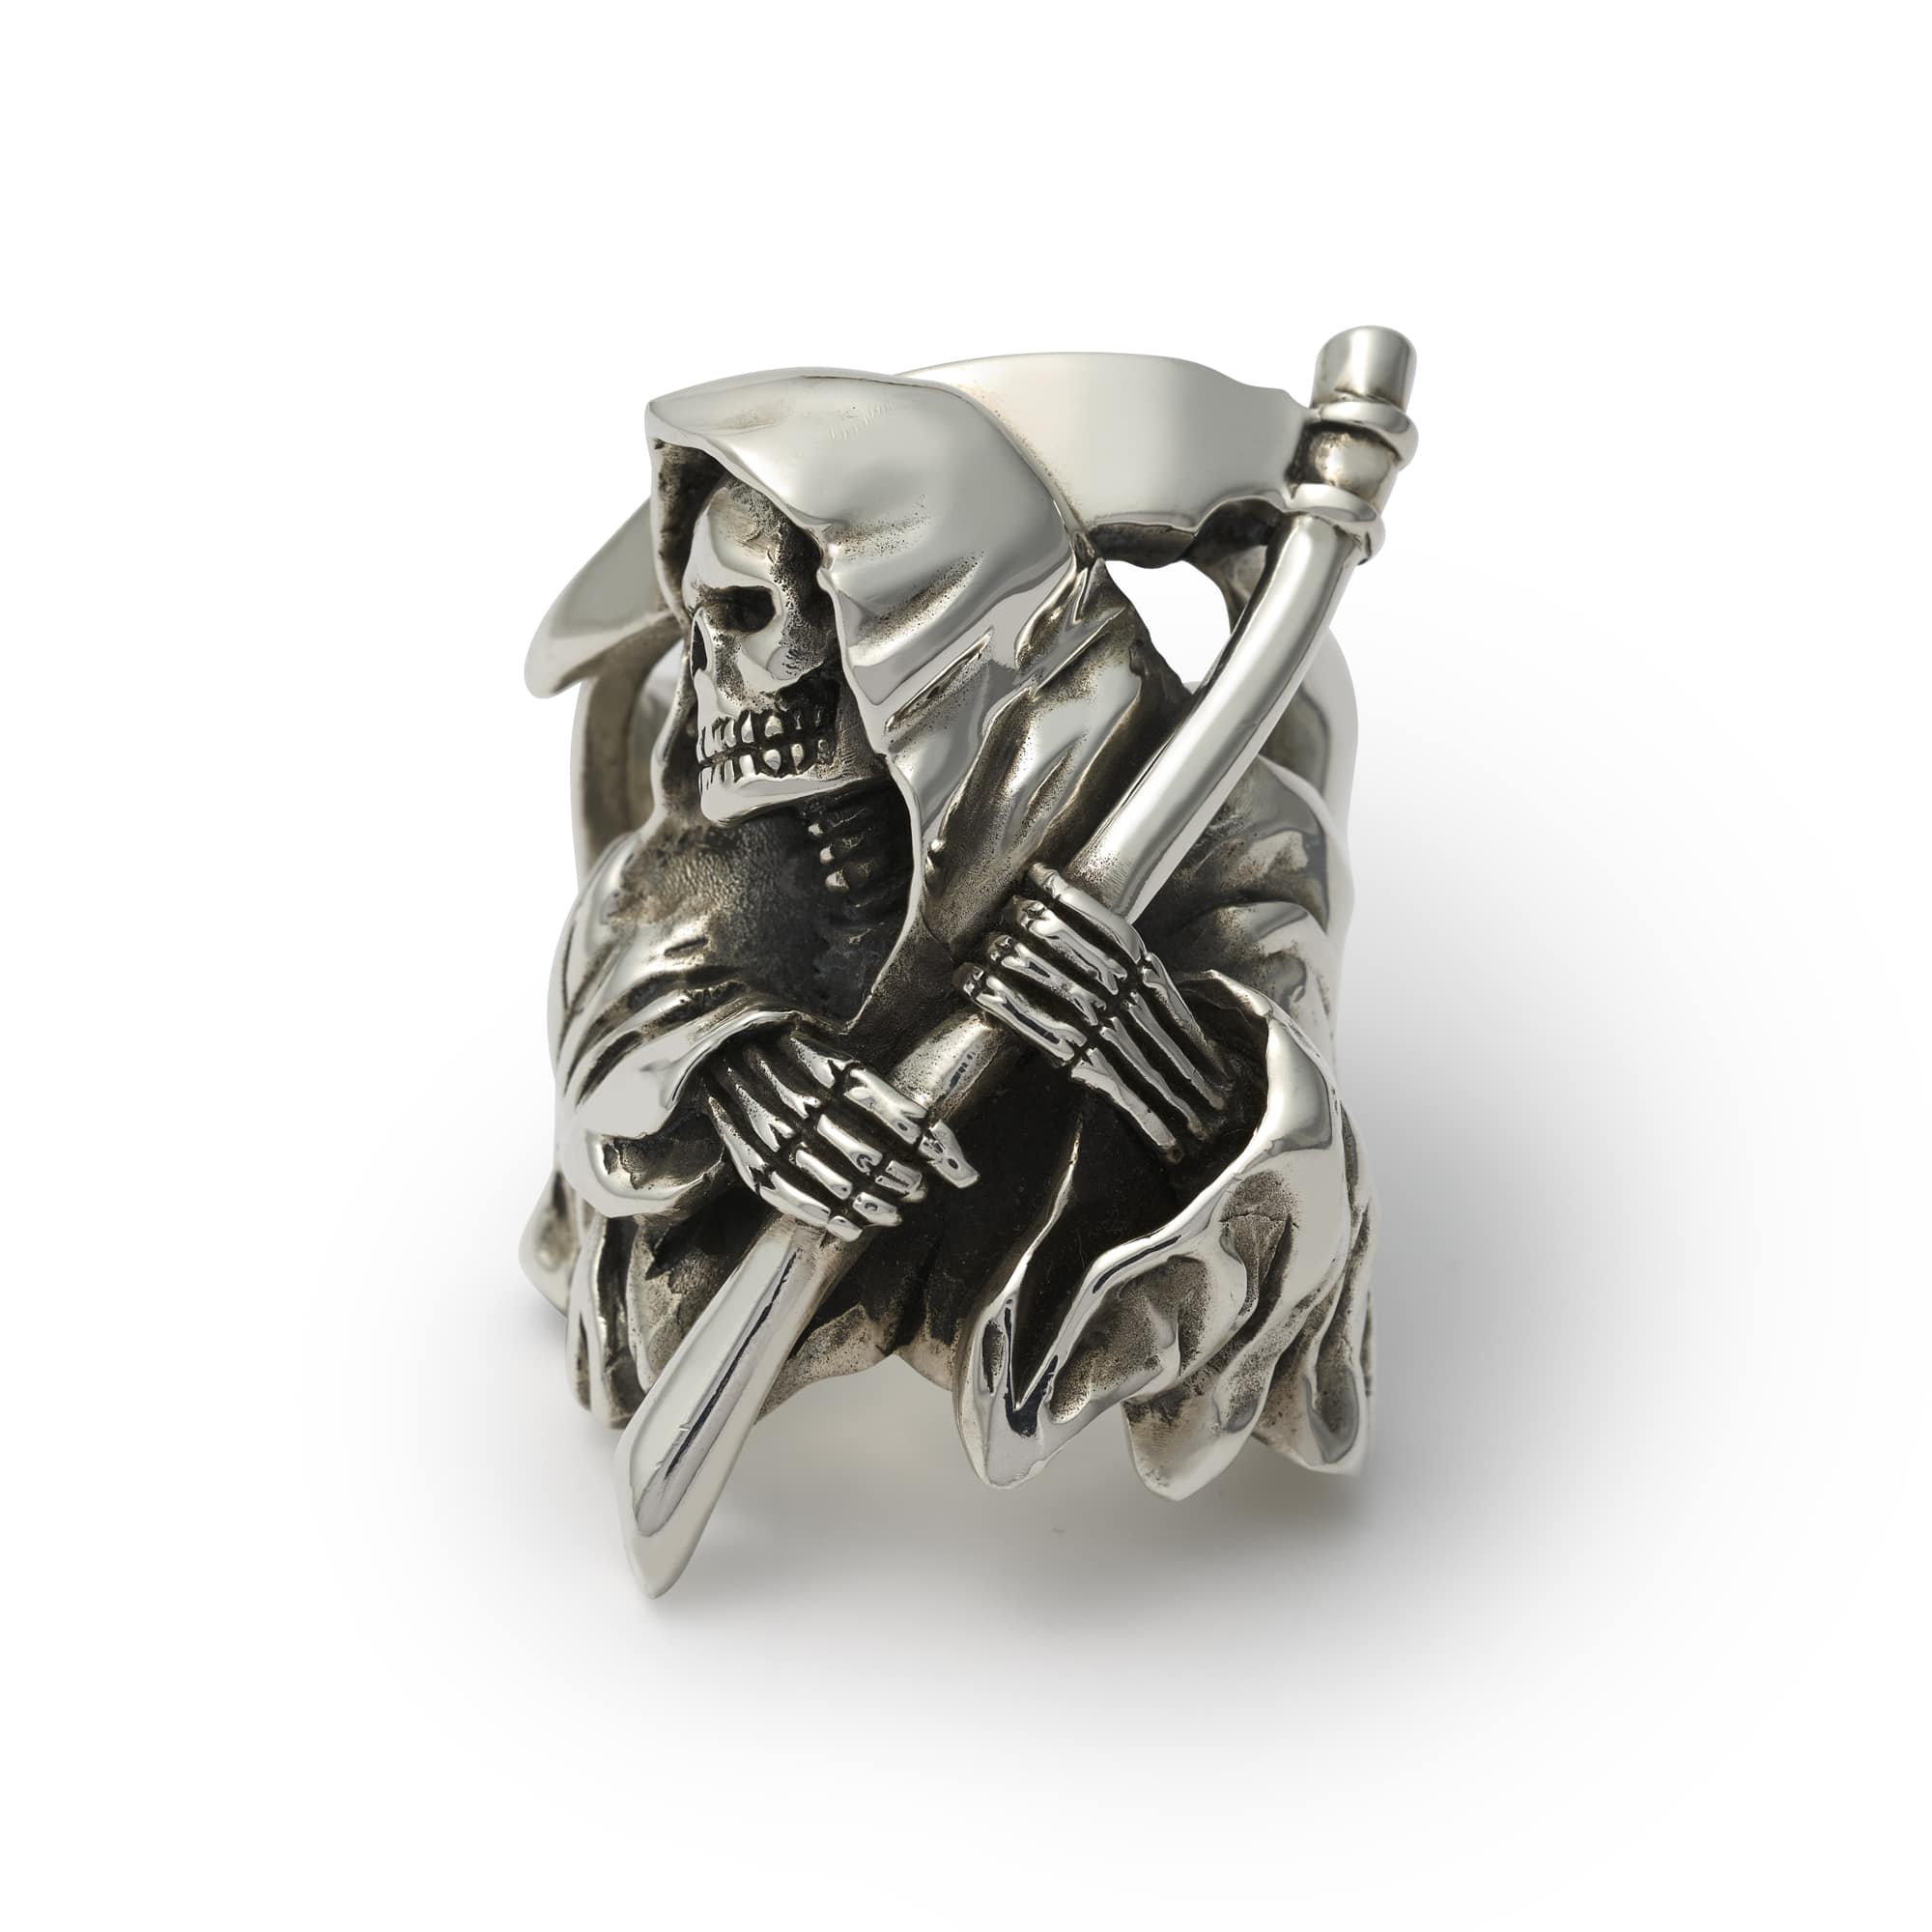 Wes Lang ‘Reaper’ Ring – The Great Frog